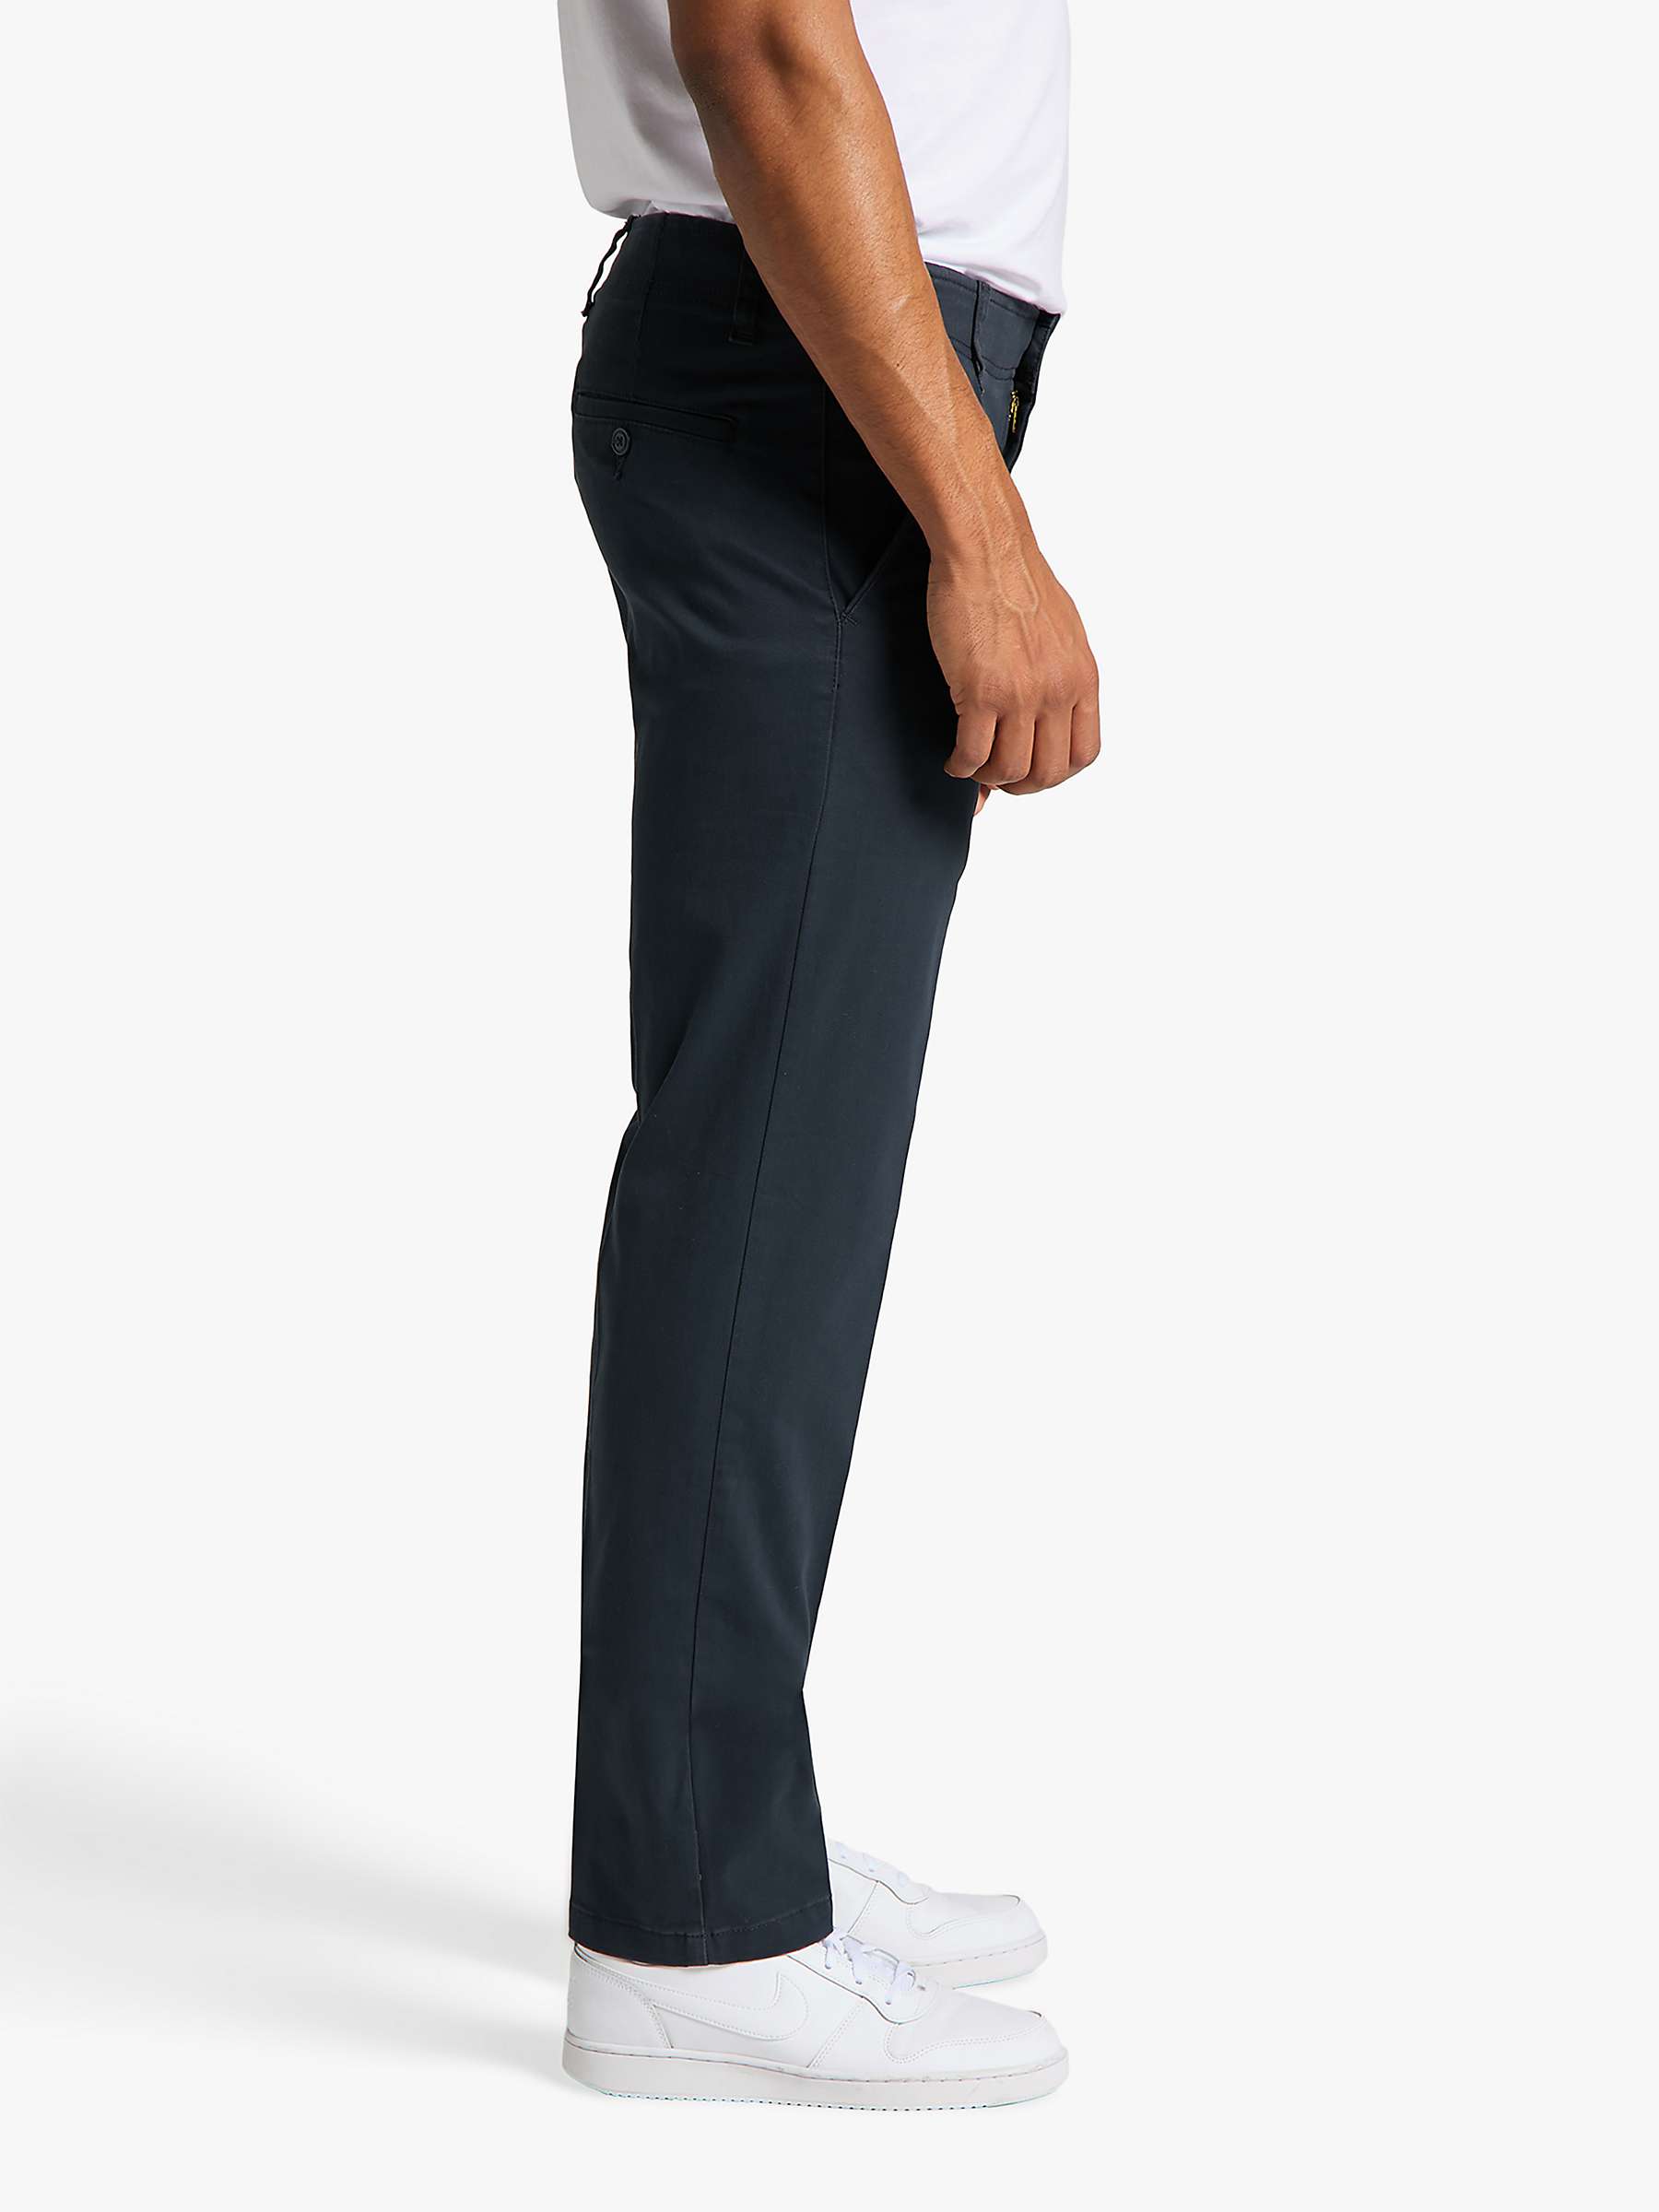 Buy Lee Cotton Blend Chinos Online at johnlewis.com